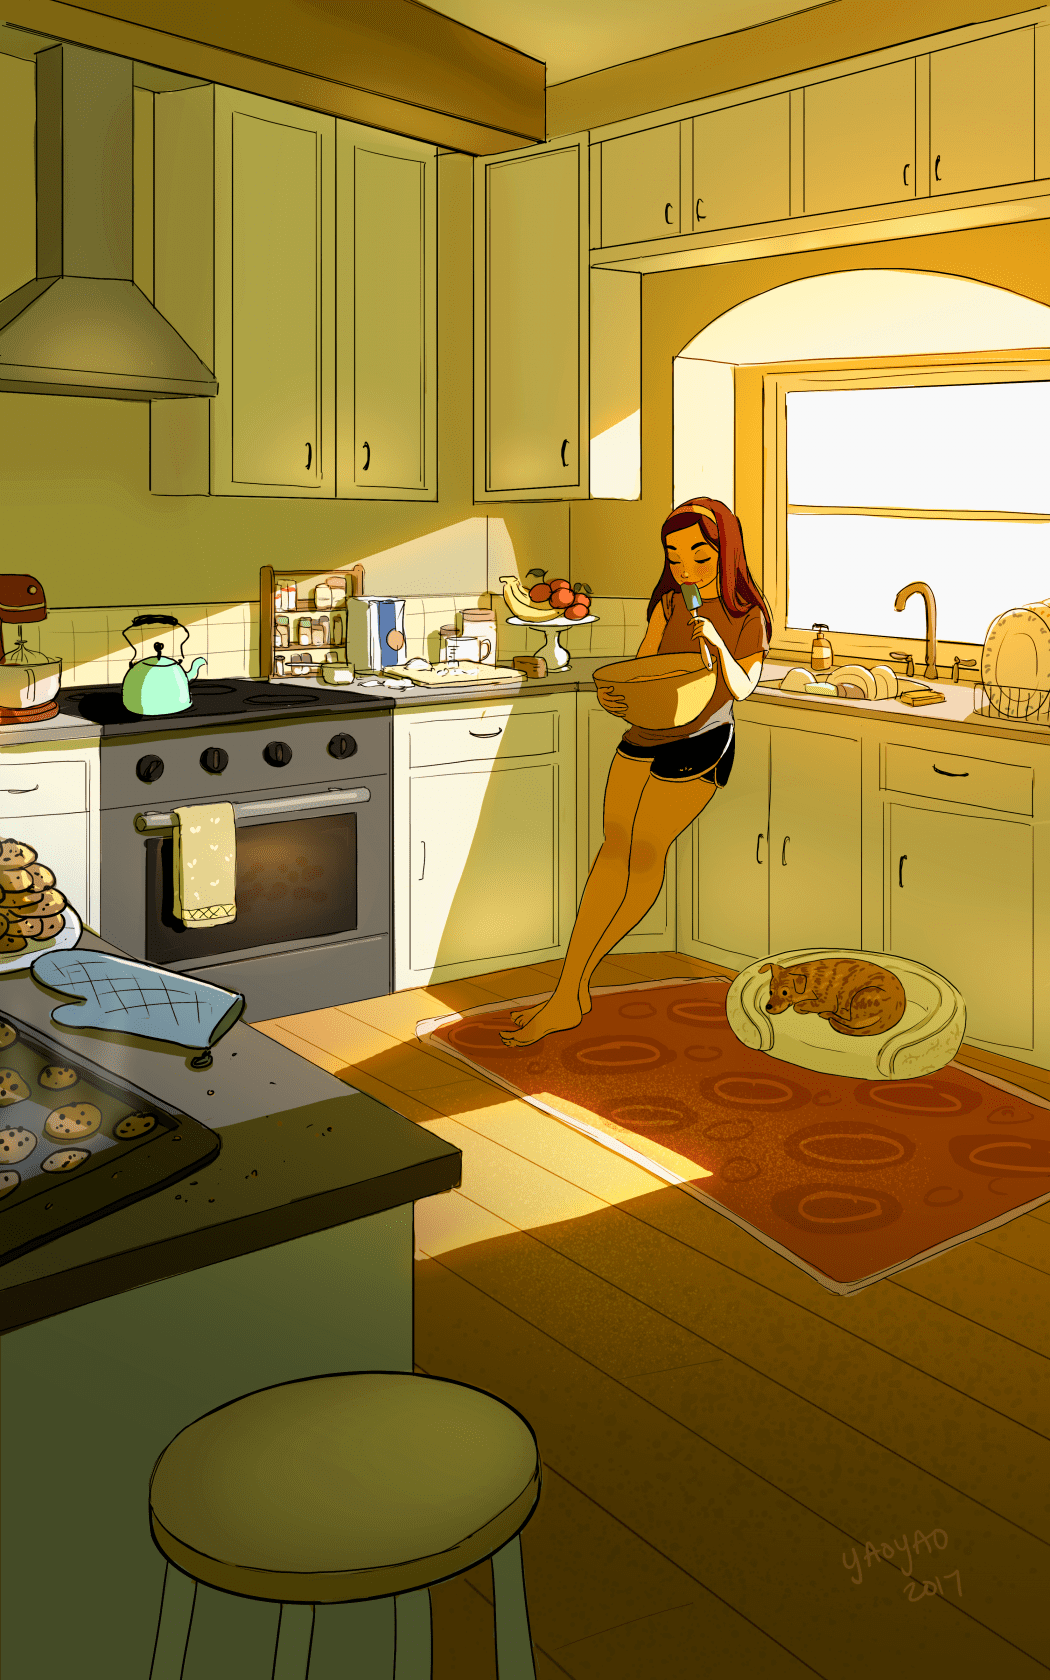 25 Gorgeous Illustrations That Perfectly Capture the Joy of Living Alone as an I